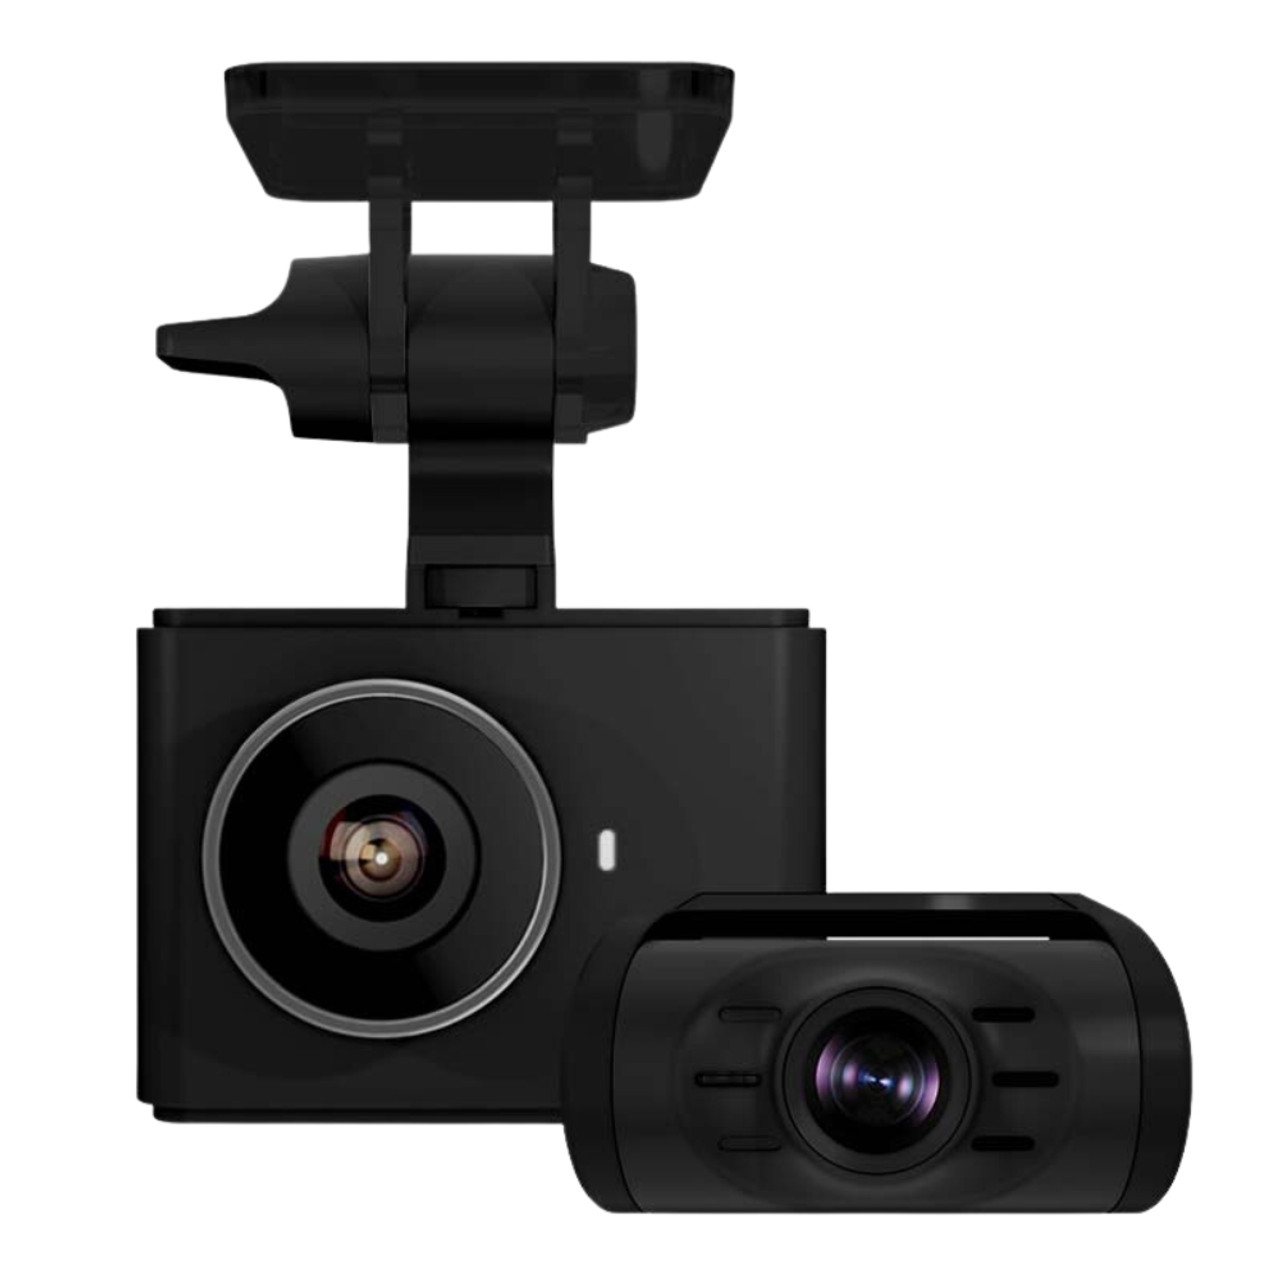 Pioneer VREC-Z710DH HD Dashcam with GPS Wi-Fi and Second HD Camera